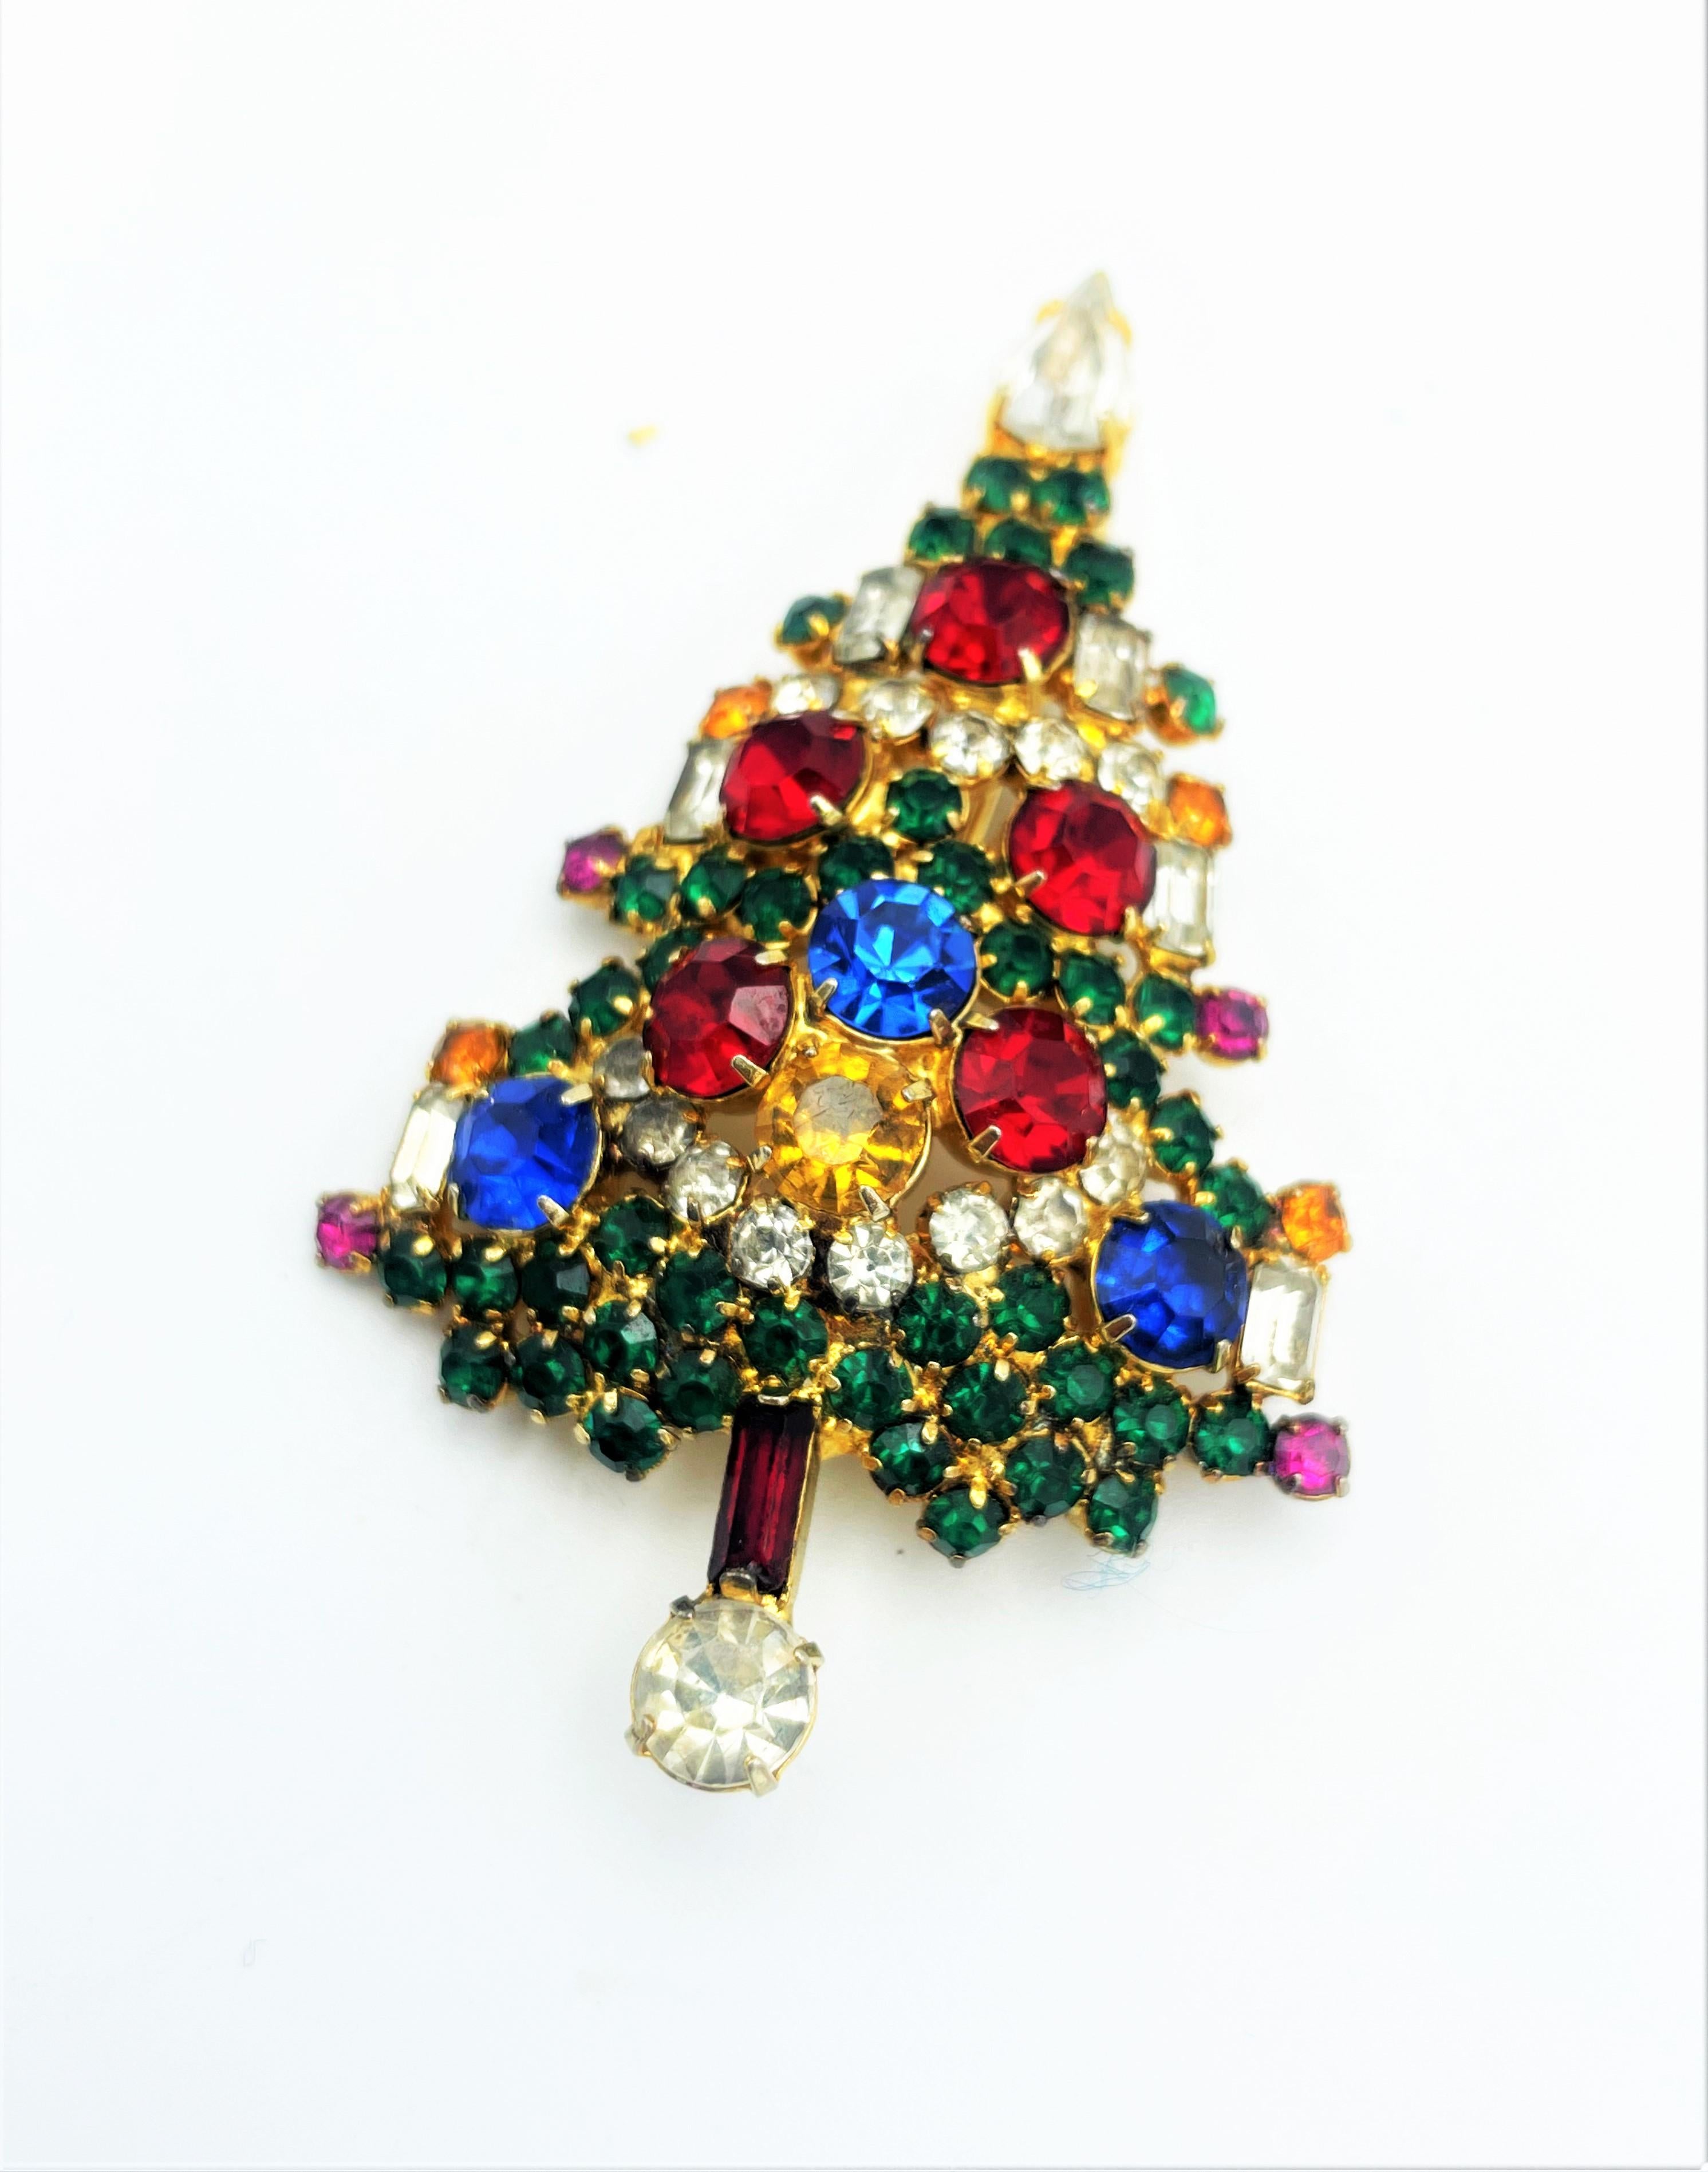 About
2 lovely Christmas tree brooches, one large and one small, fully set with rhinestones in the form of candles, glass balls and green branches.
Measurement
The large tree Hight 6,5 cm (inches 2,56), Wight 4 cm (inches 1,57)  15 grams
The small